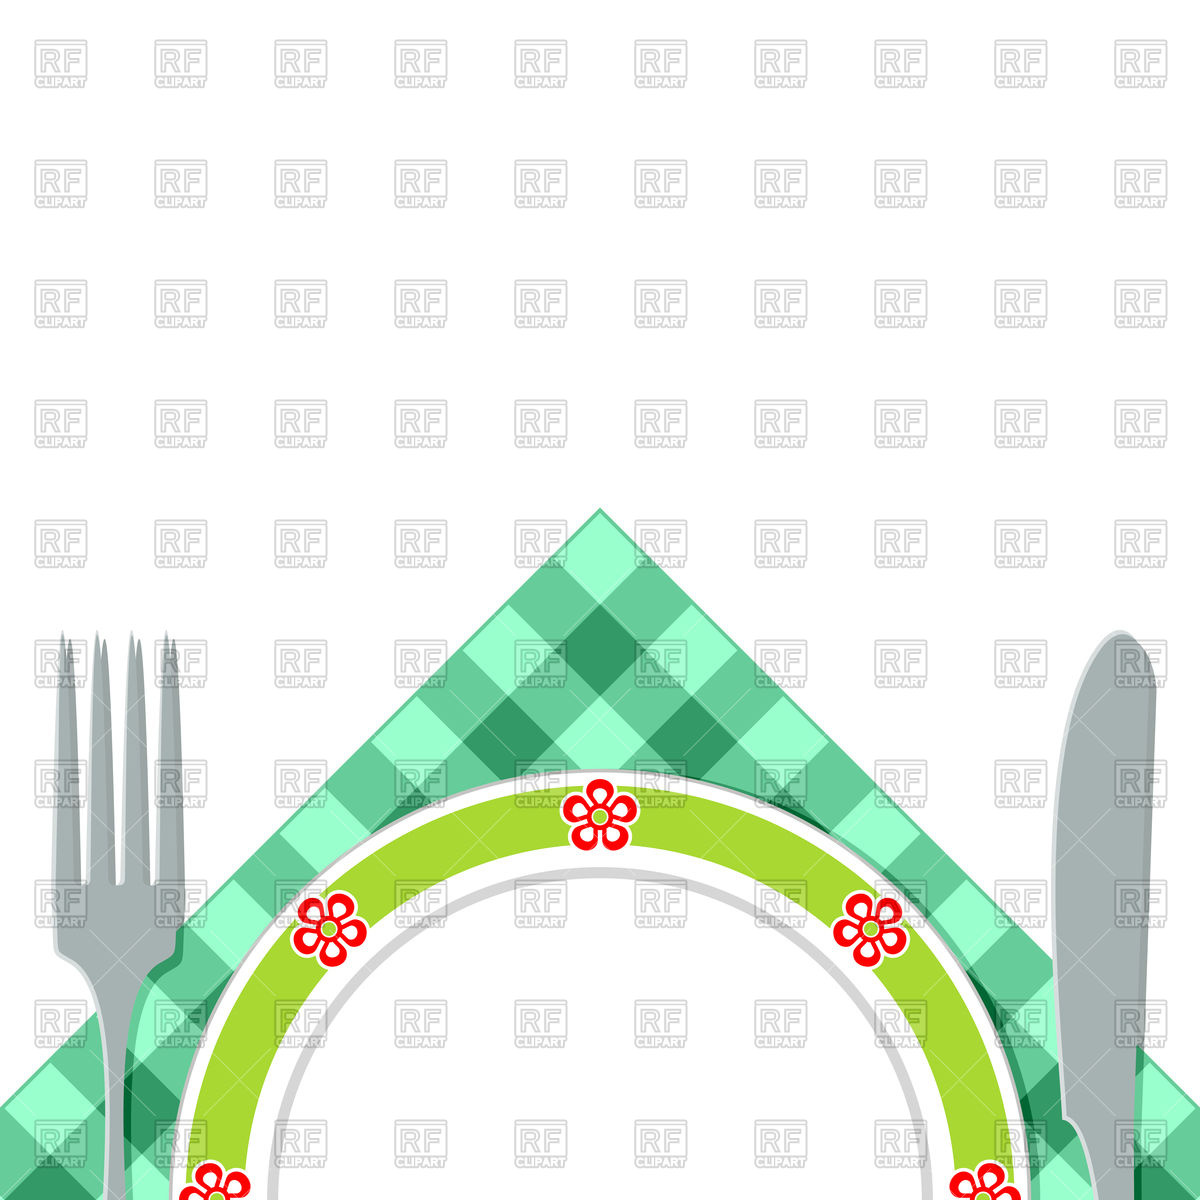 Breakfast   Empty Plate On Napkin 97744 Download Royalty Free Vector